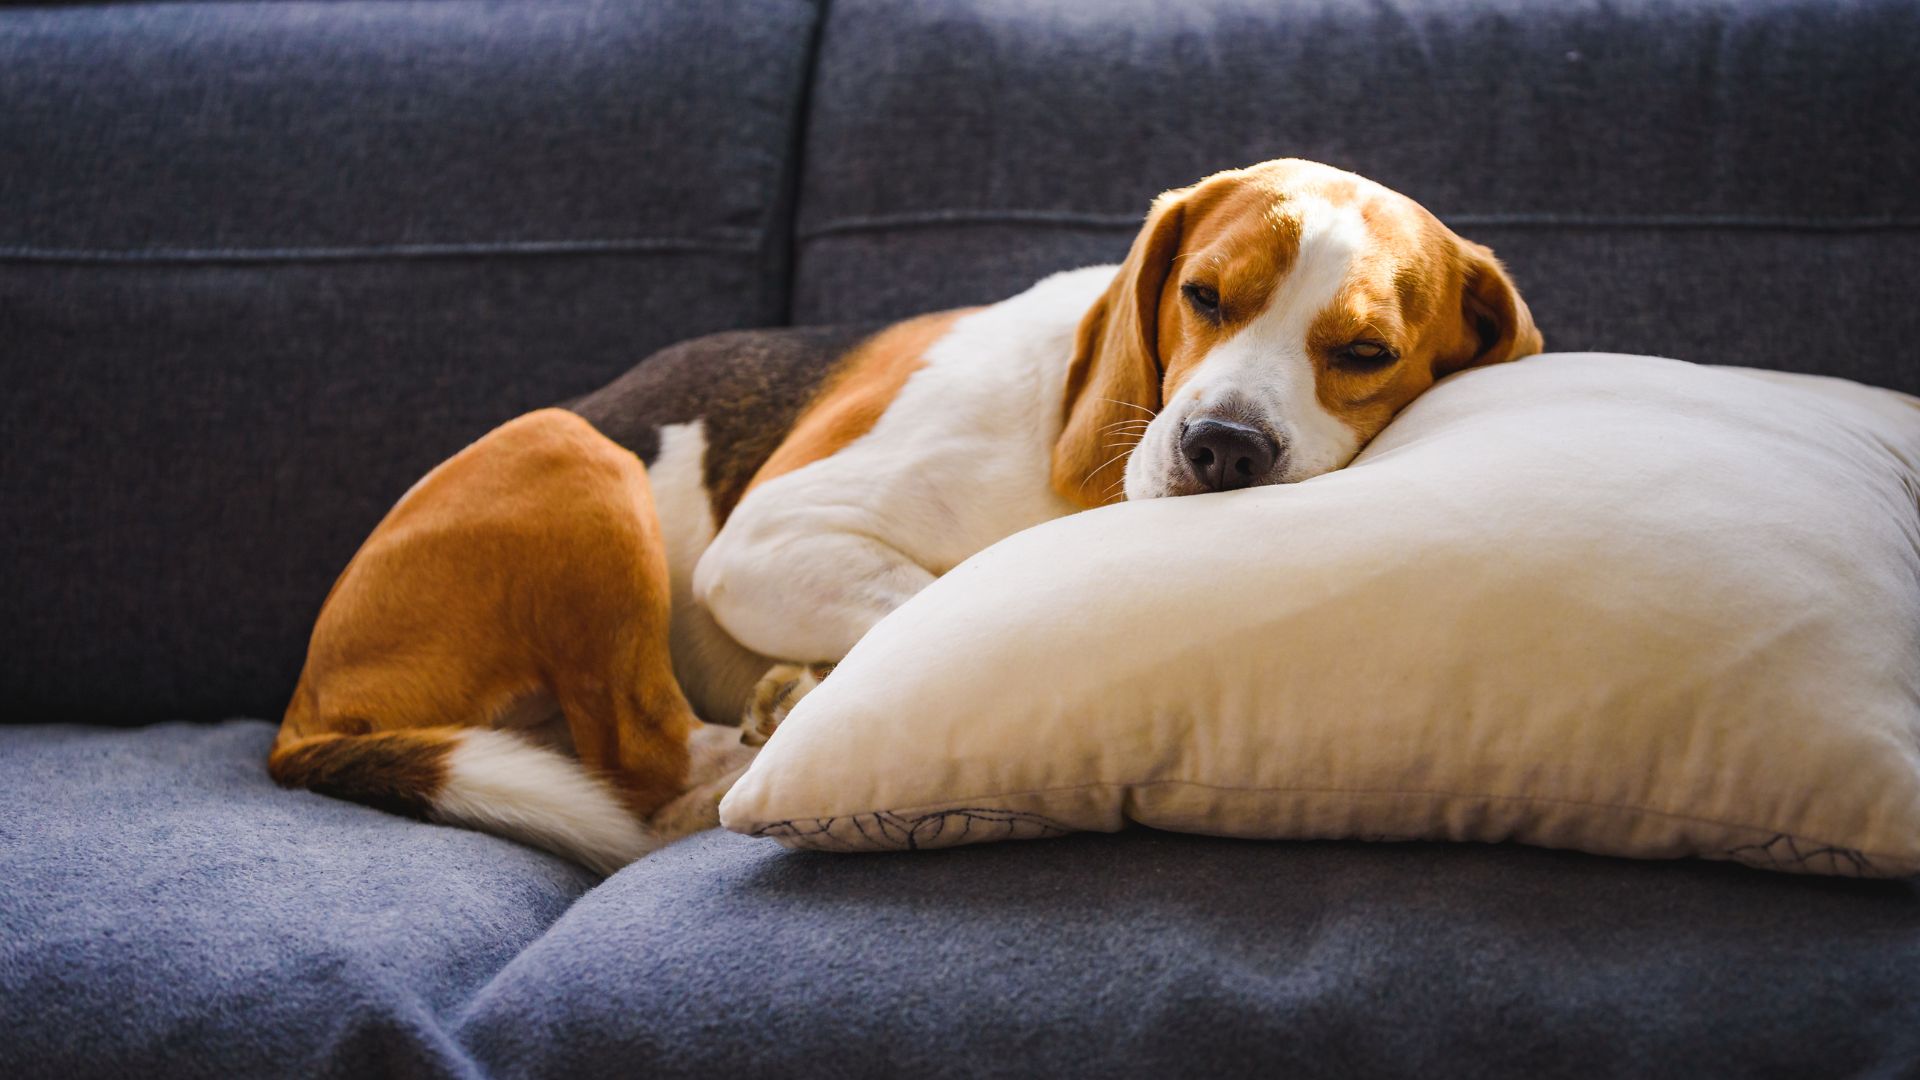 dog tired sleeps on a couch in funny position